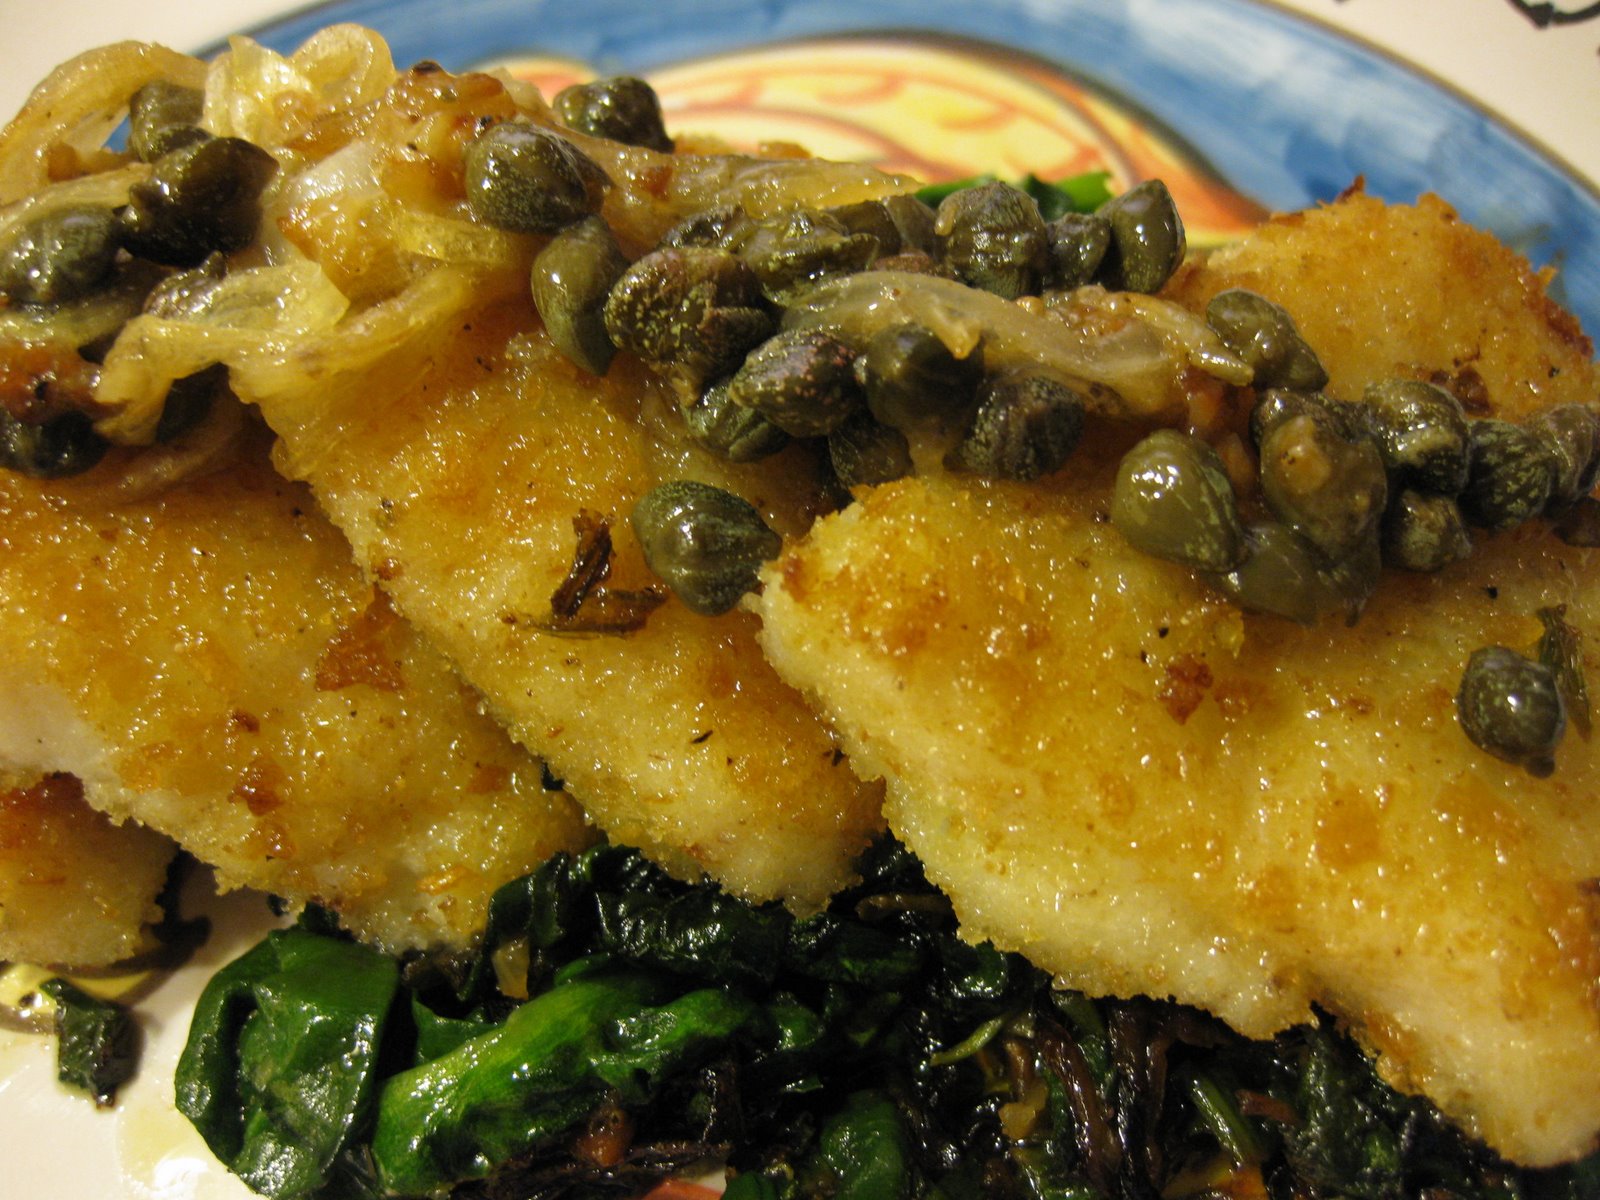 [Sole+breaded+on+spinach+w+caper+sauce.JPG]